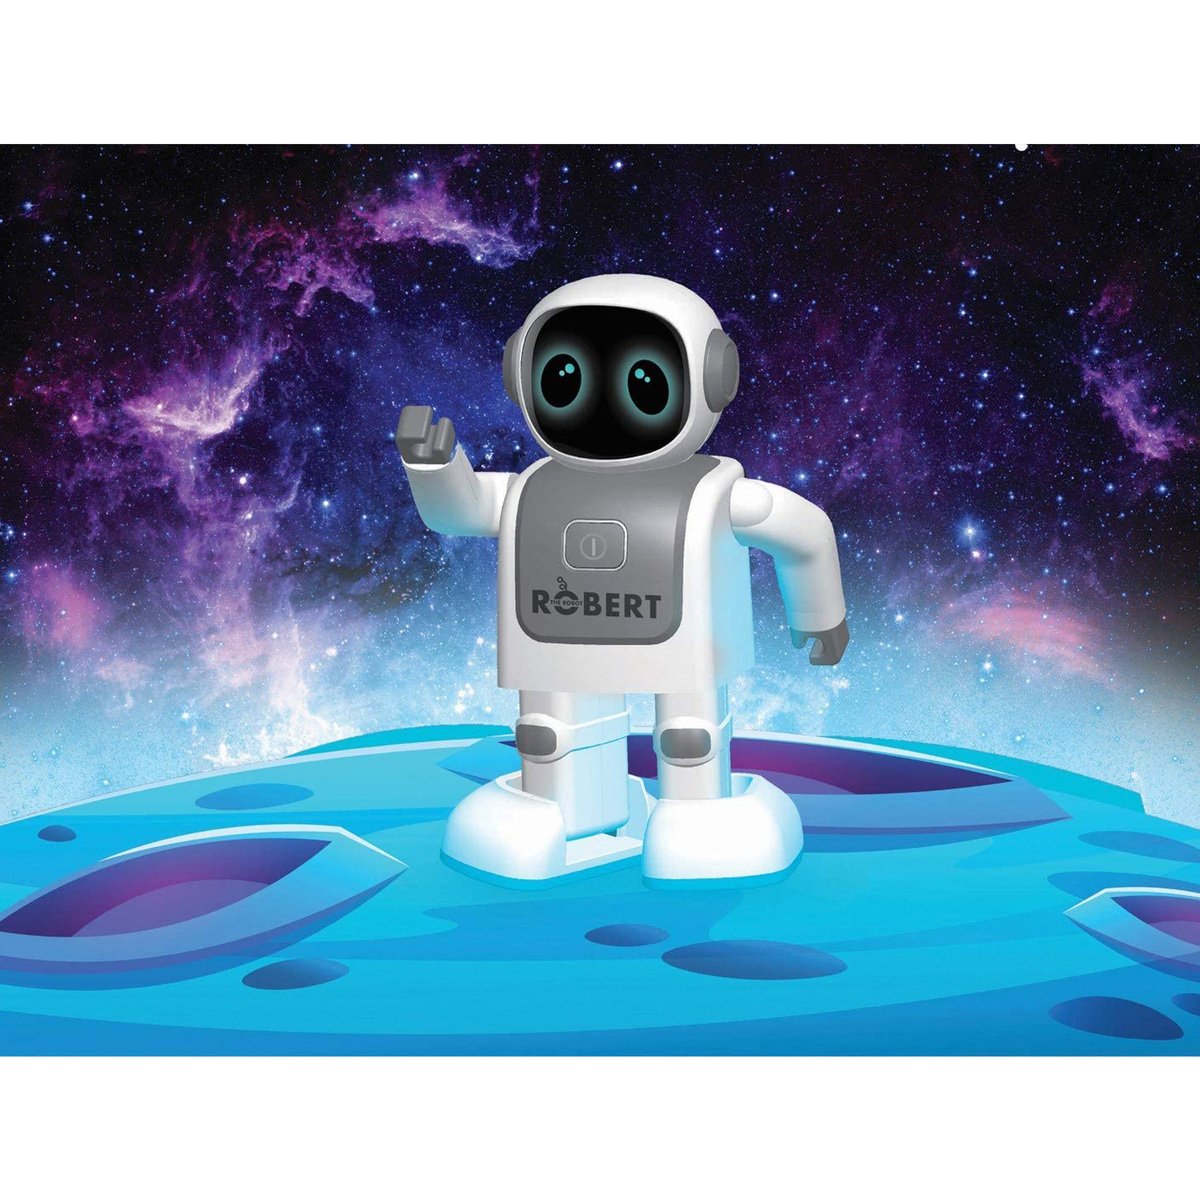 Robert The Robot by Switch - App Controlled Robot & Wireless Speaker